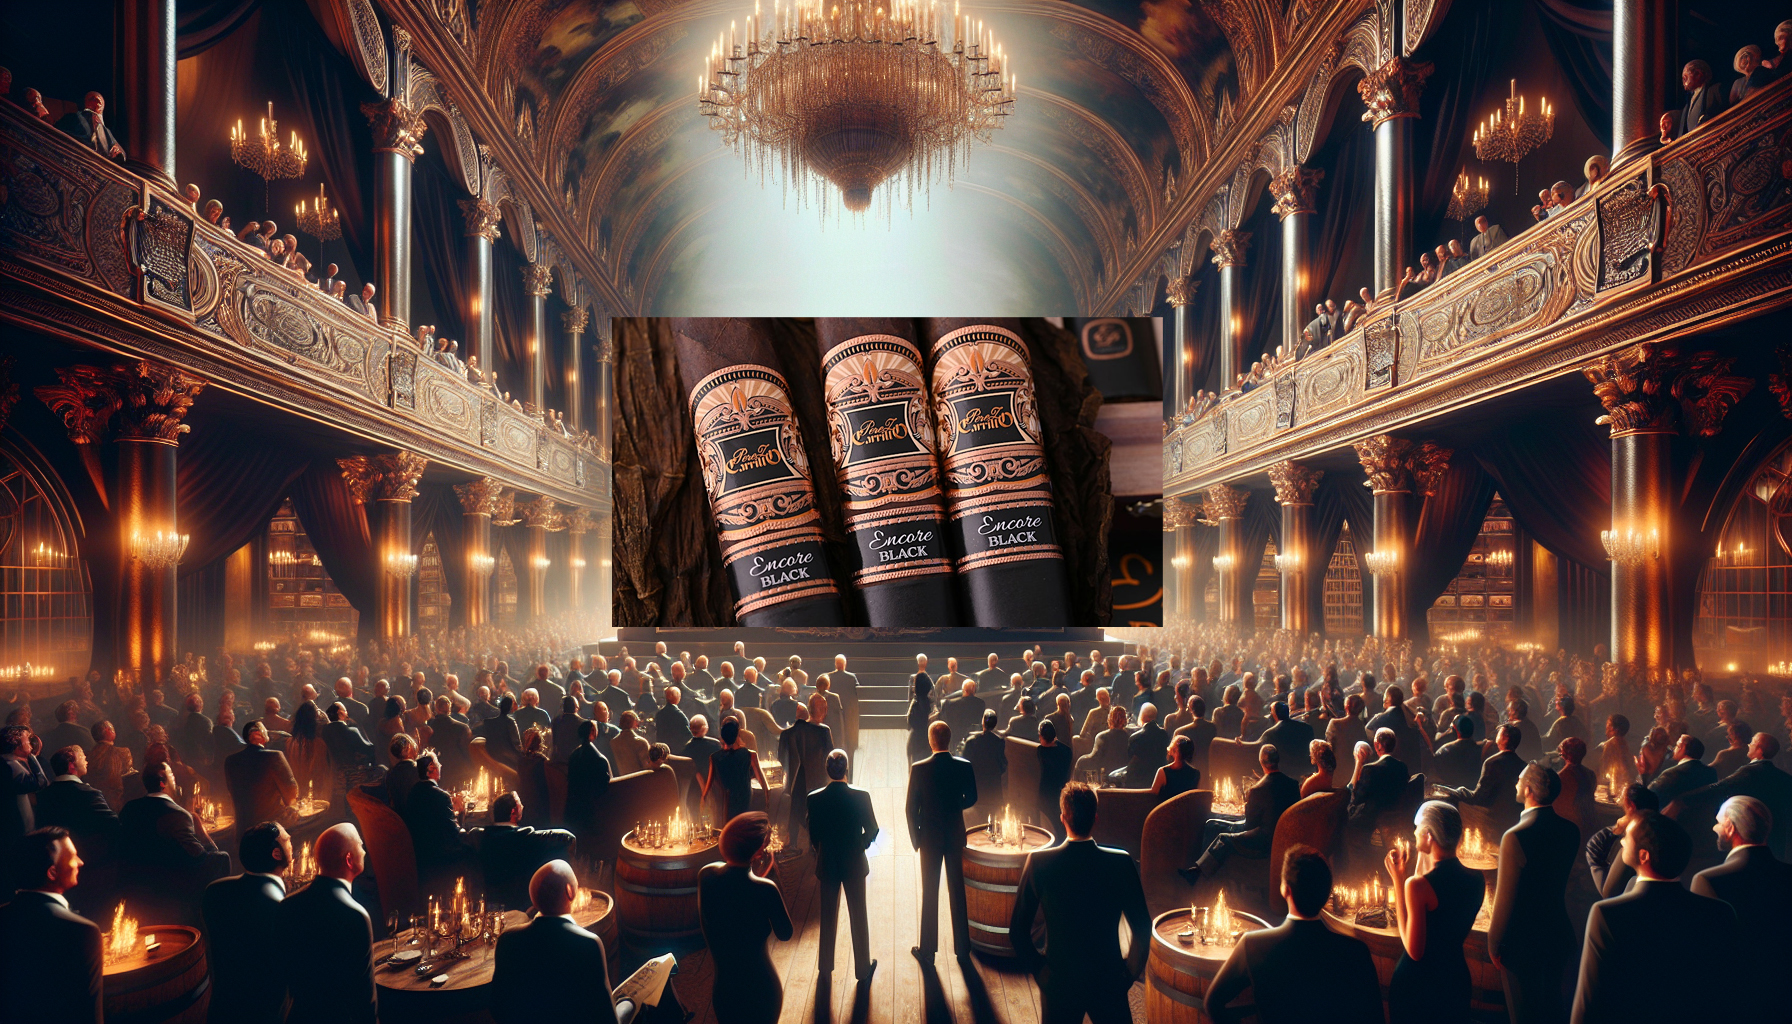 Artistic representation of the limited production run of 5,000 boxes of the e.p Carrillo Encore Black, creating anticipation and excitement among cigar aficionados